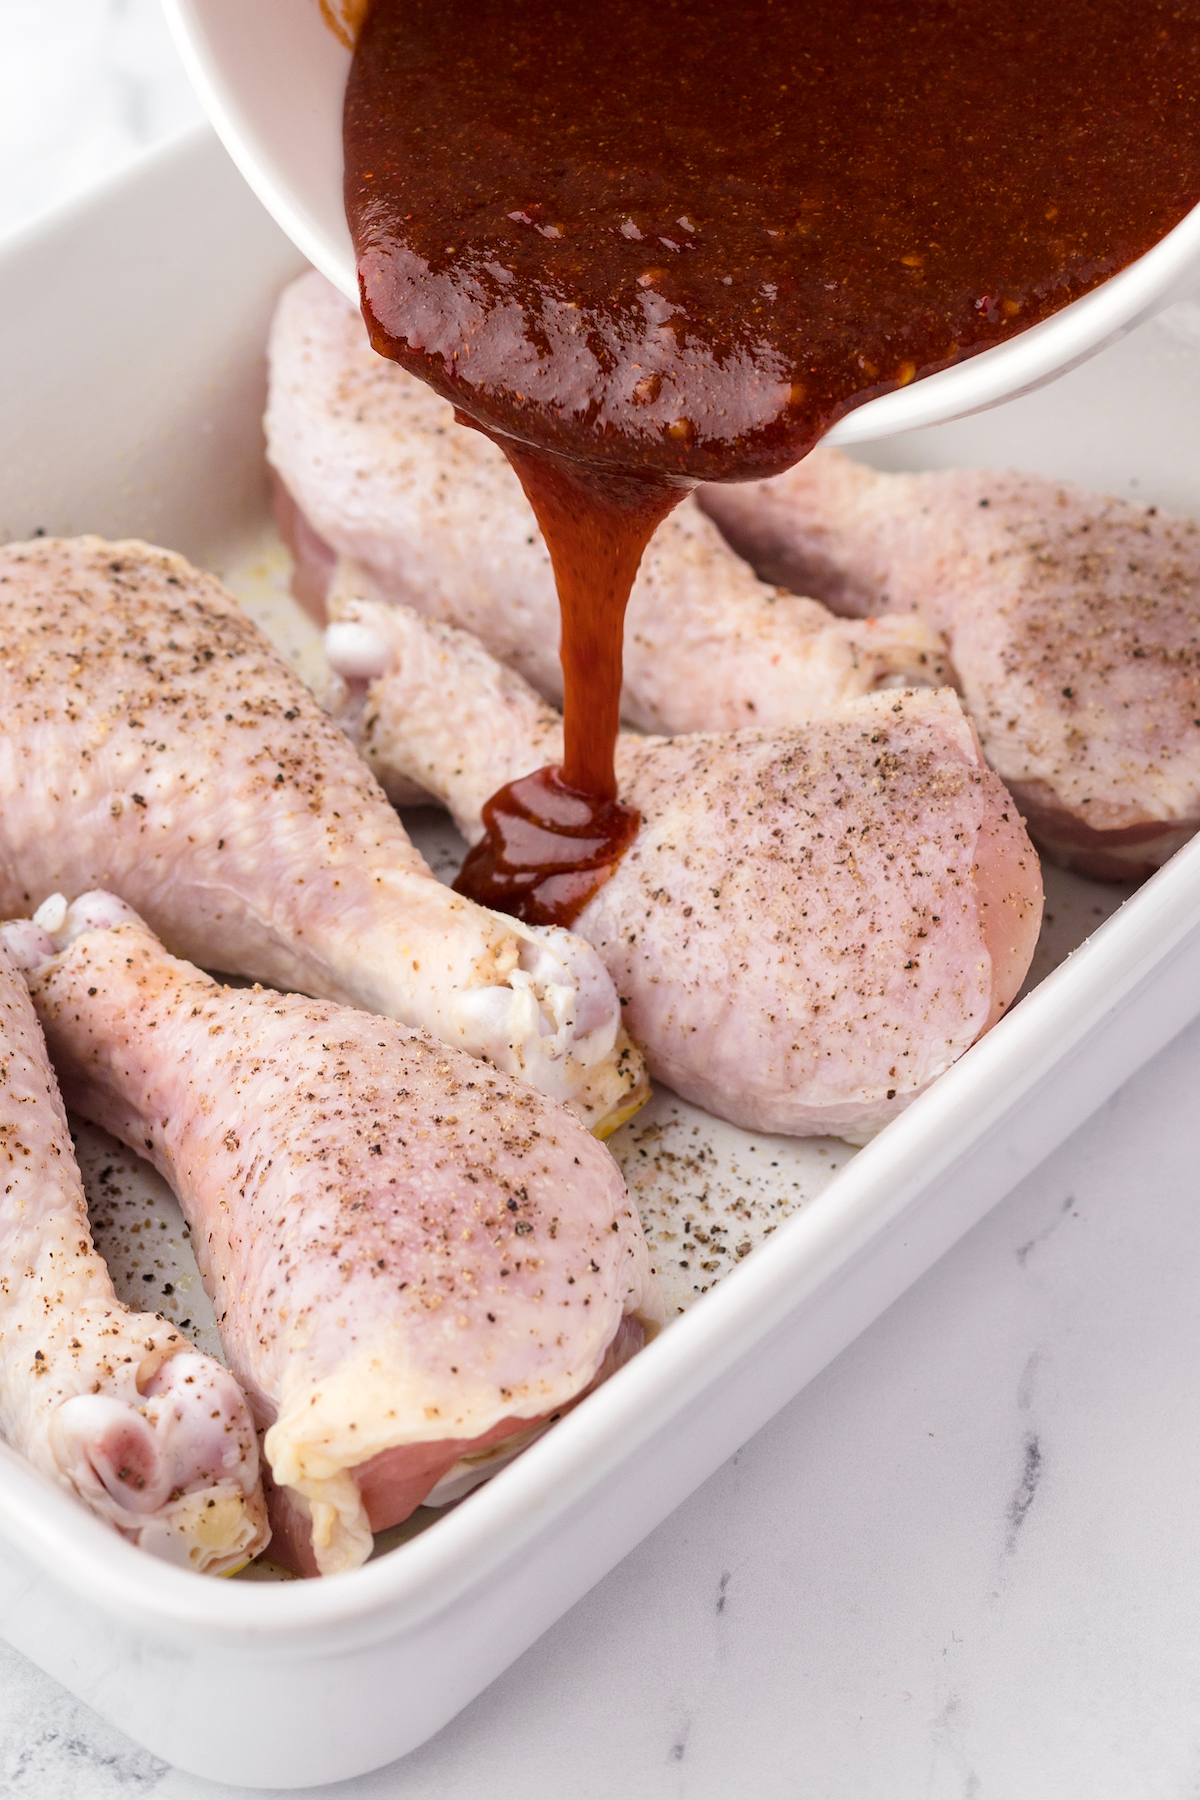 Pouring BBQ Sauce over chicken drumsticks to prepare for baking in oven